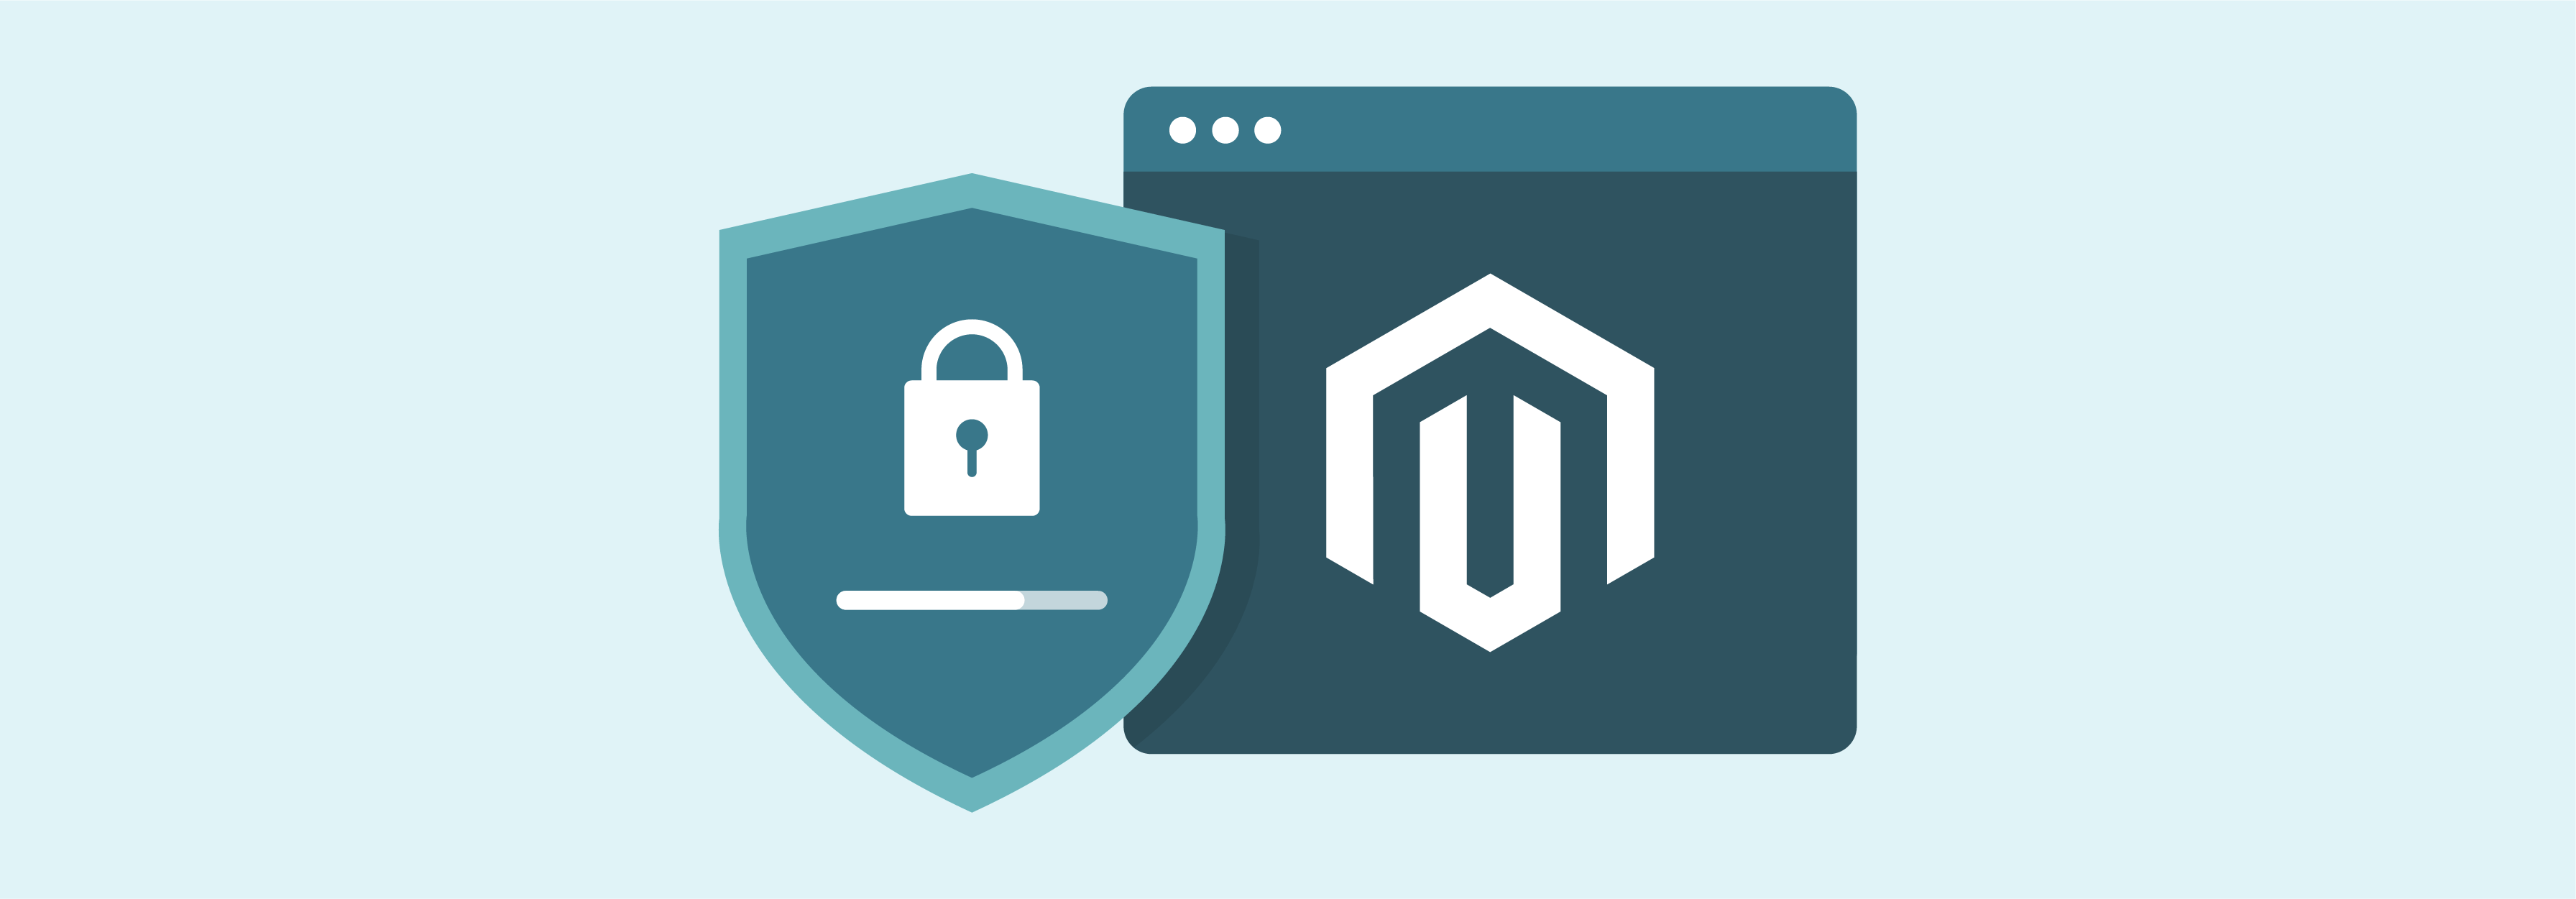 Conducting Regular Security Checks in Magento Ecommerce Stores